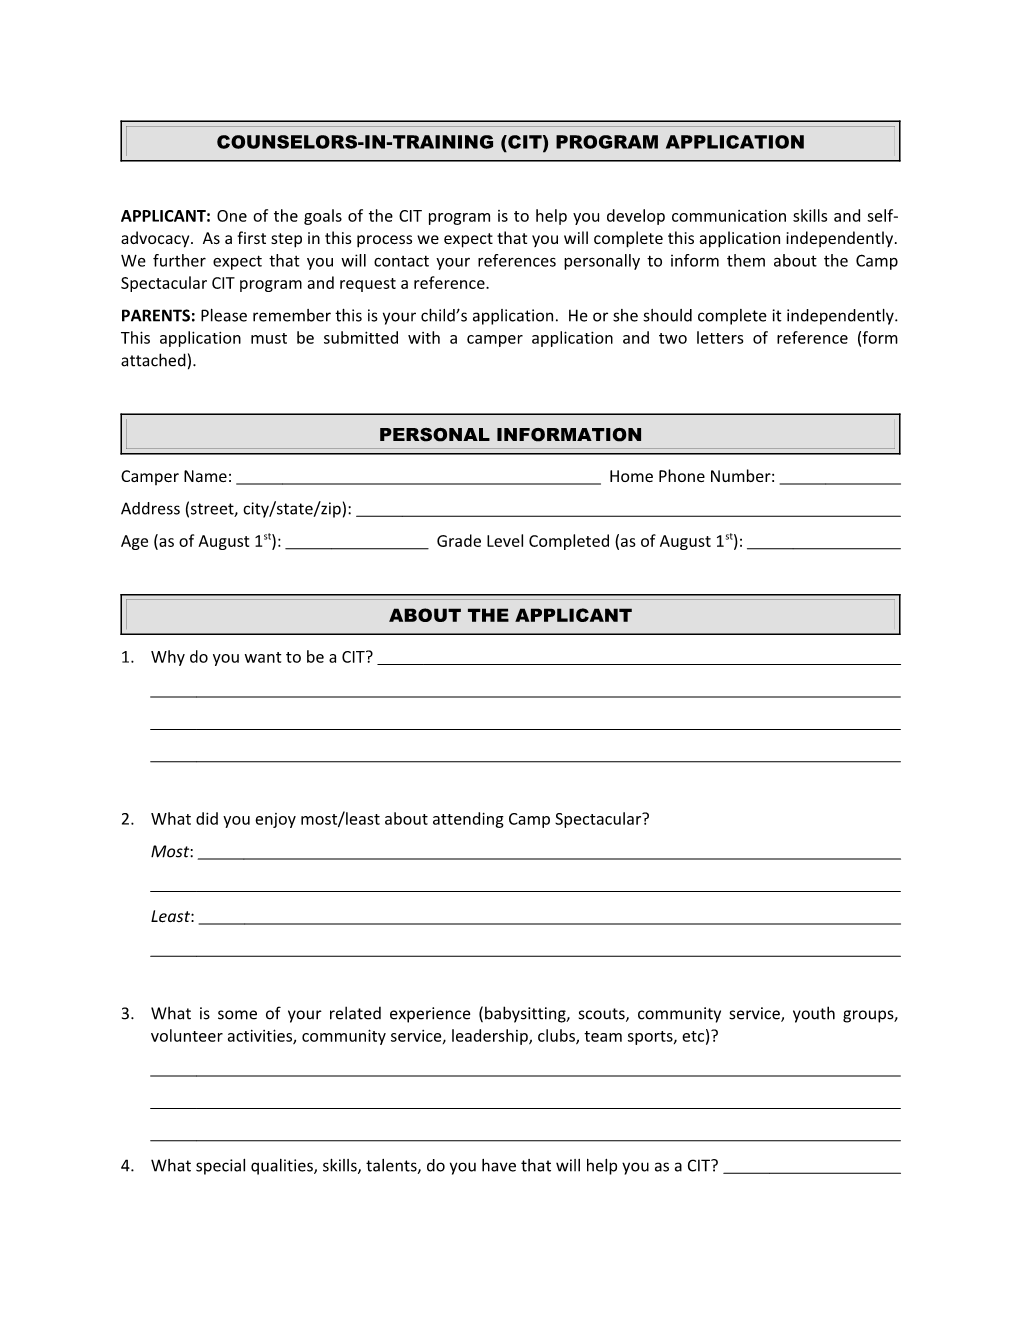 Parents: Please Remember This Is Your Child S Application